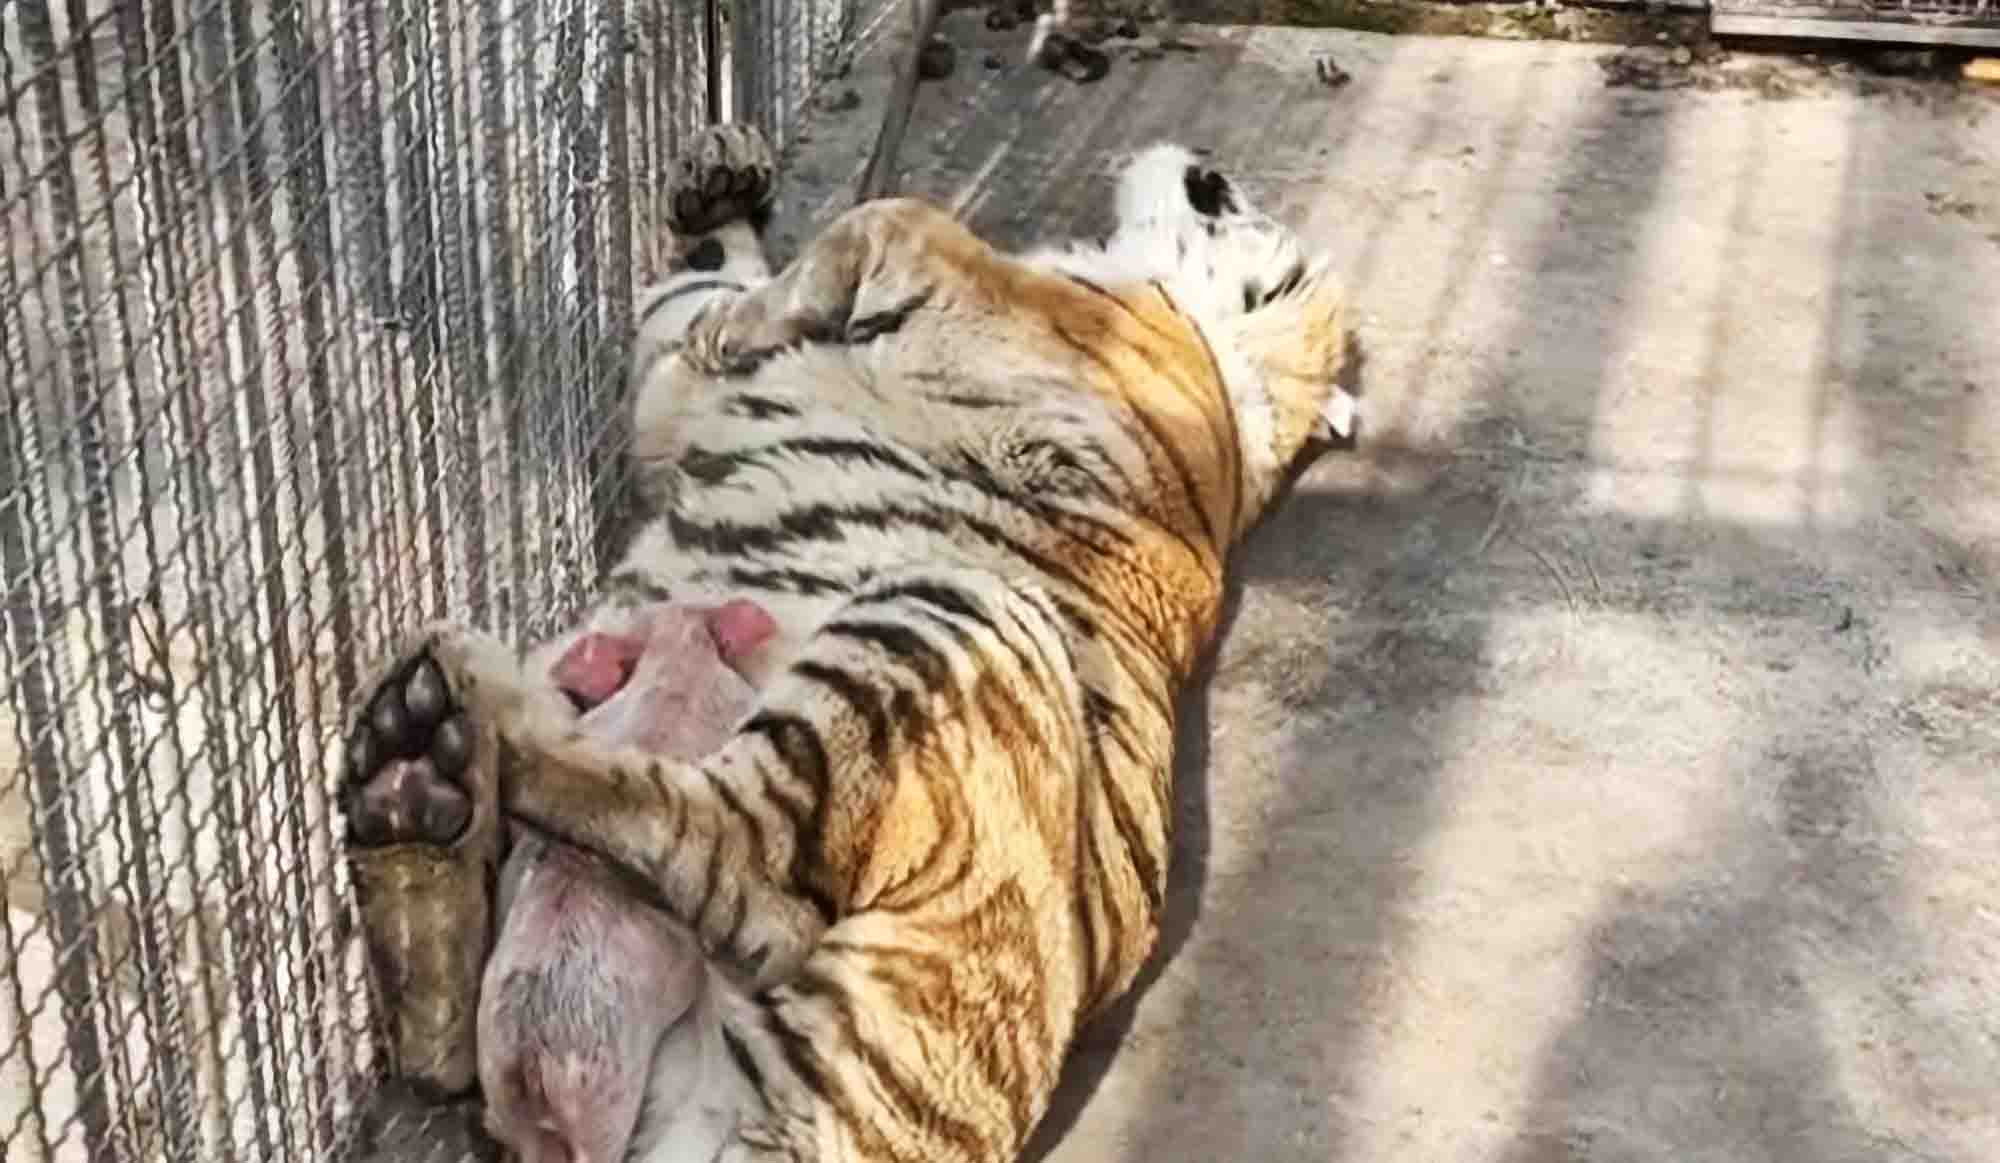 Tiny Piglet Cuddles Up With Tigger For Afternoon Nap At Zoo